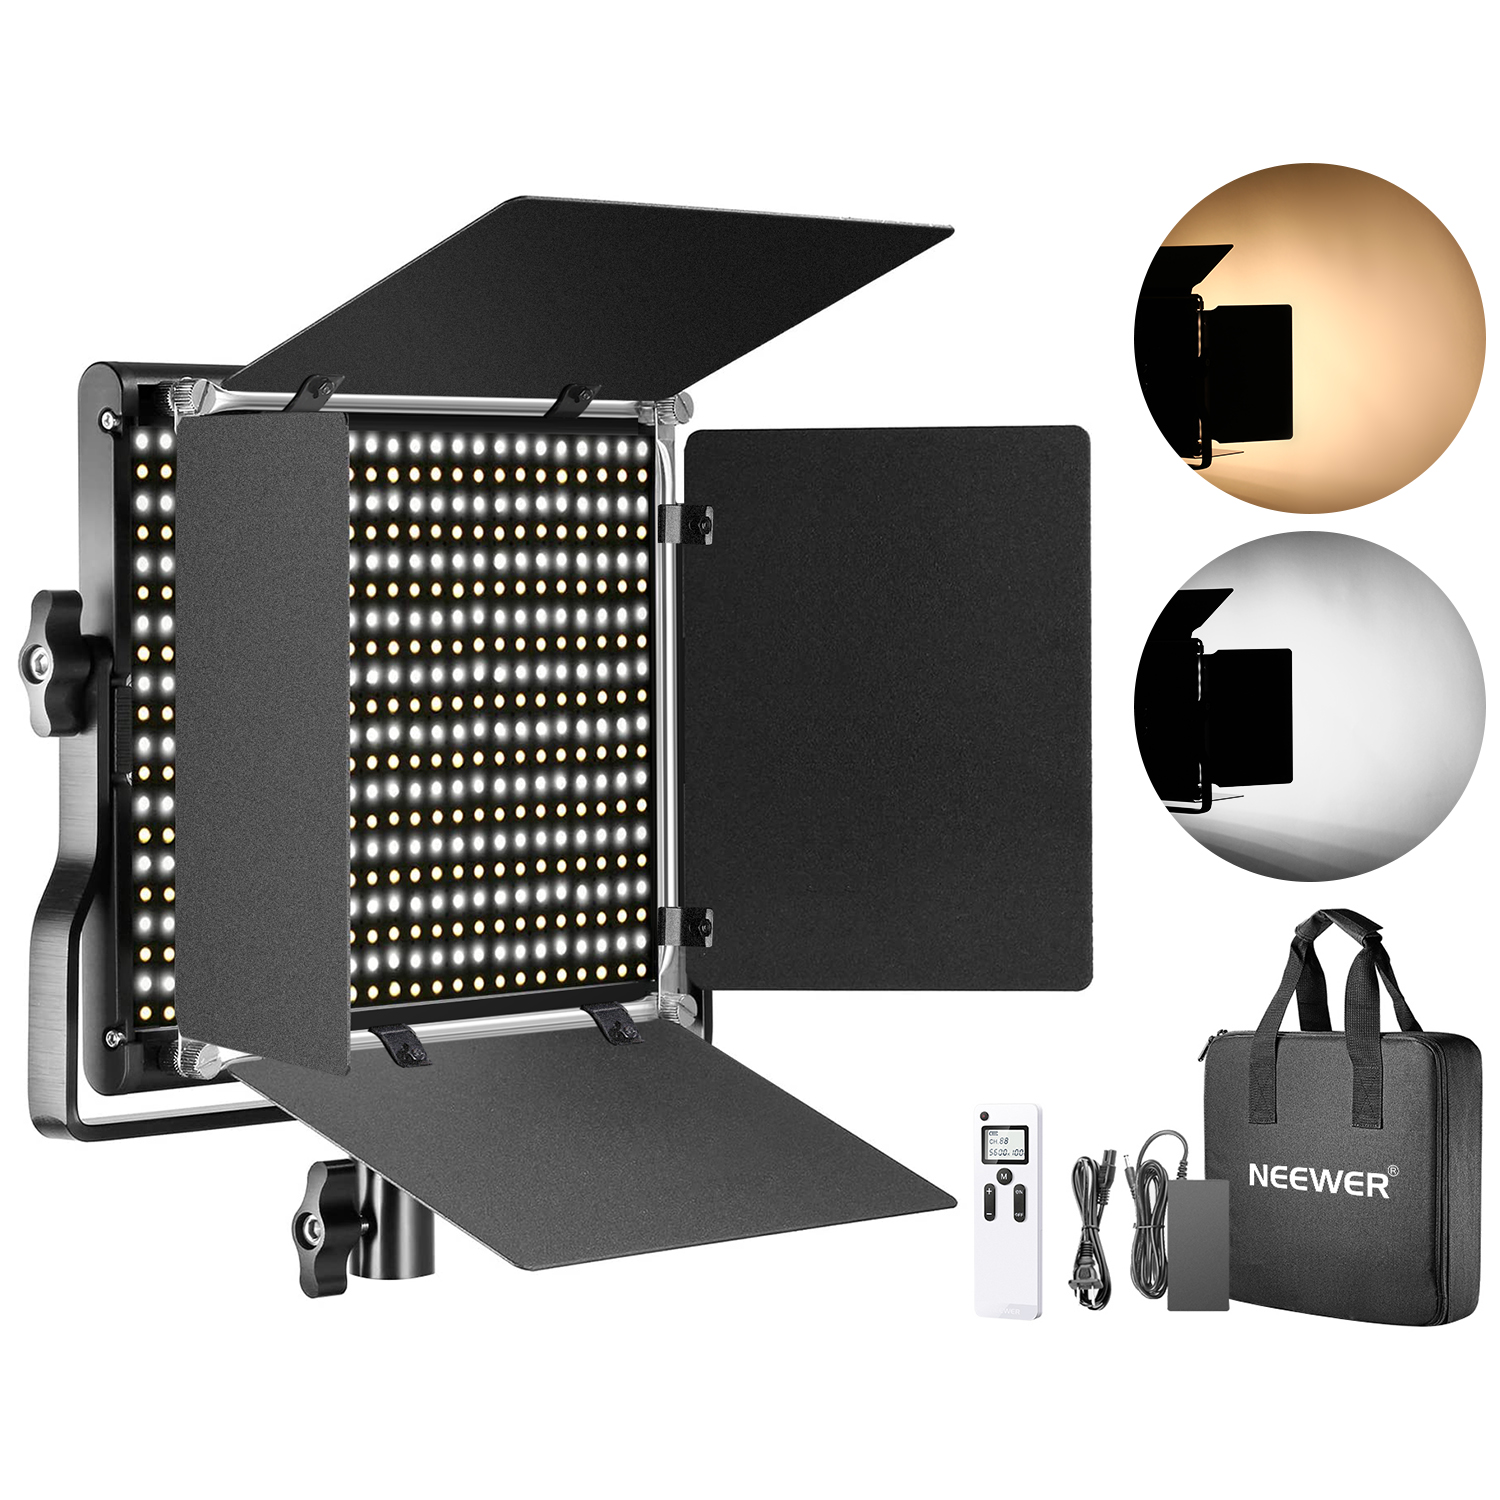  Neewer Upgraded 660 LED Video Light Dimmable Bi-Color LED  Panel with LCD Screen for Studio,  Video Shooting Product  Photography, 660 Beads CRI 96+, Durable Metal with U Bracket and